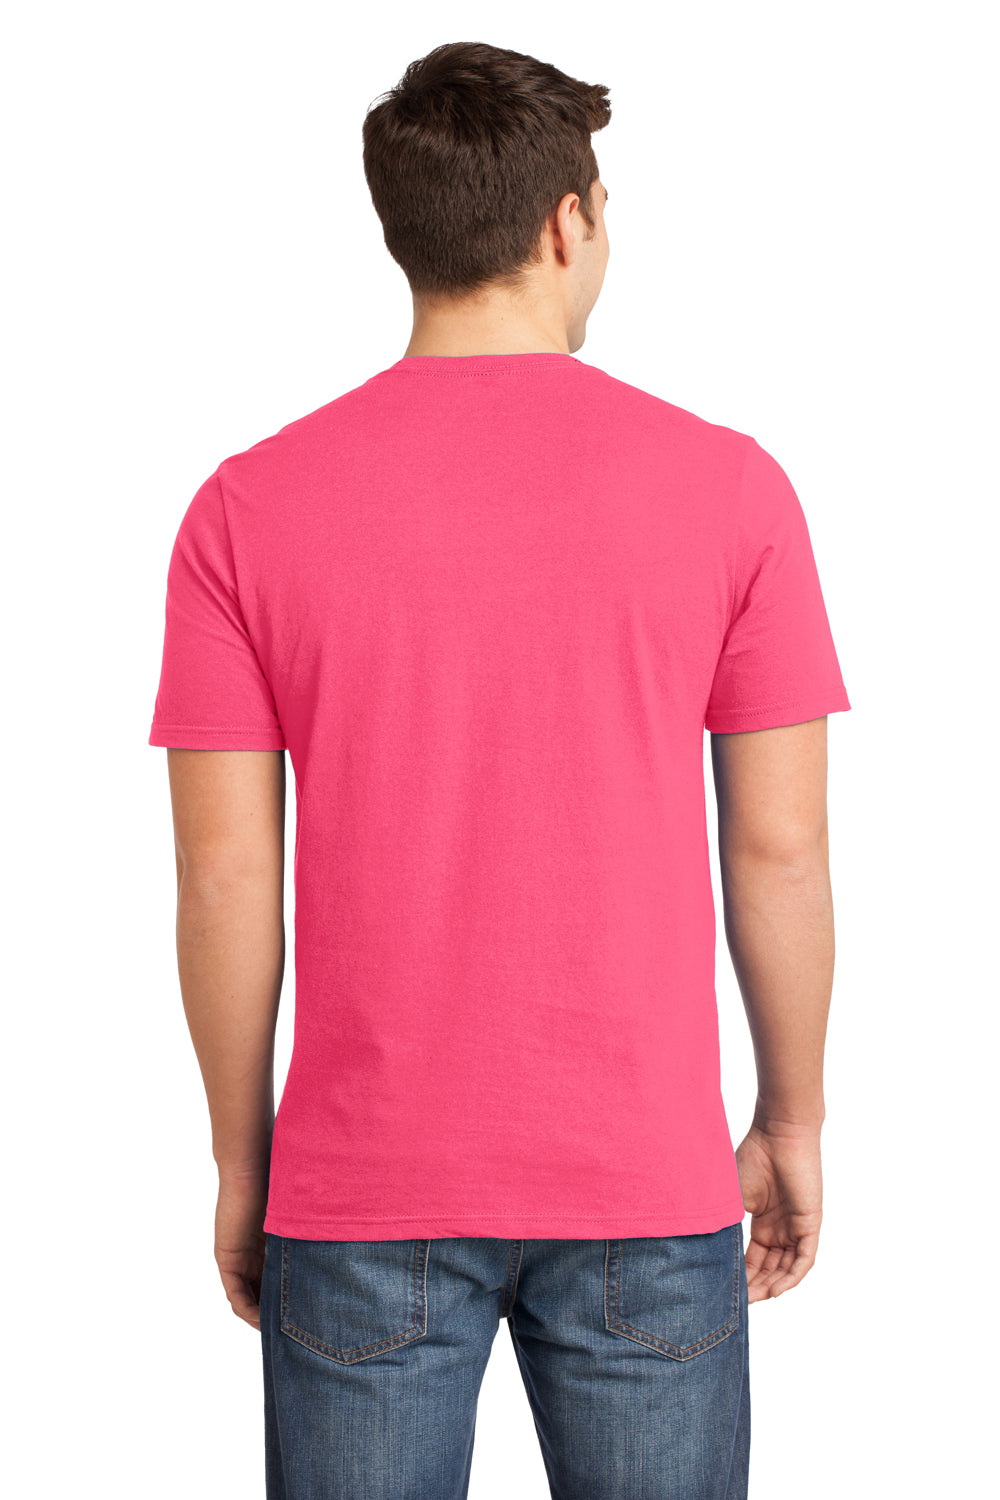 District DT6000 Mens Very Important Short Sleeve Crewneck T-Shirt Neon Pink Back